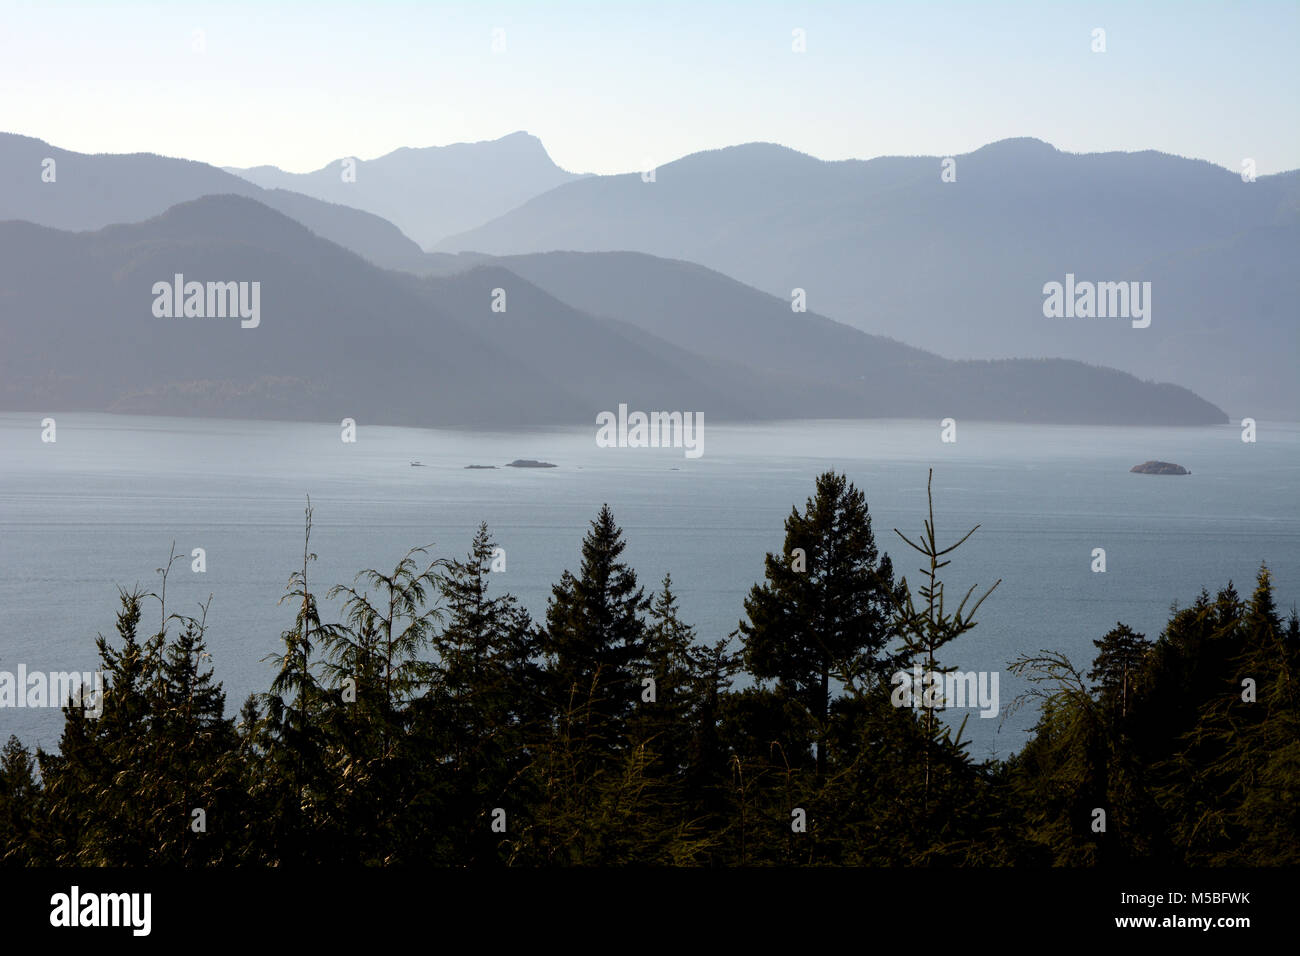 A view of Howe Sound and the mountains of Gambler Island and the mainland coast in silhouette, seen from Lions Bay, British Columbia, Canada. Stock Photo